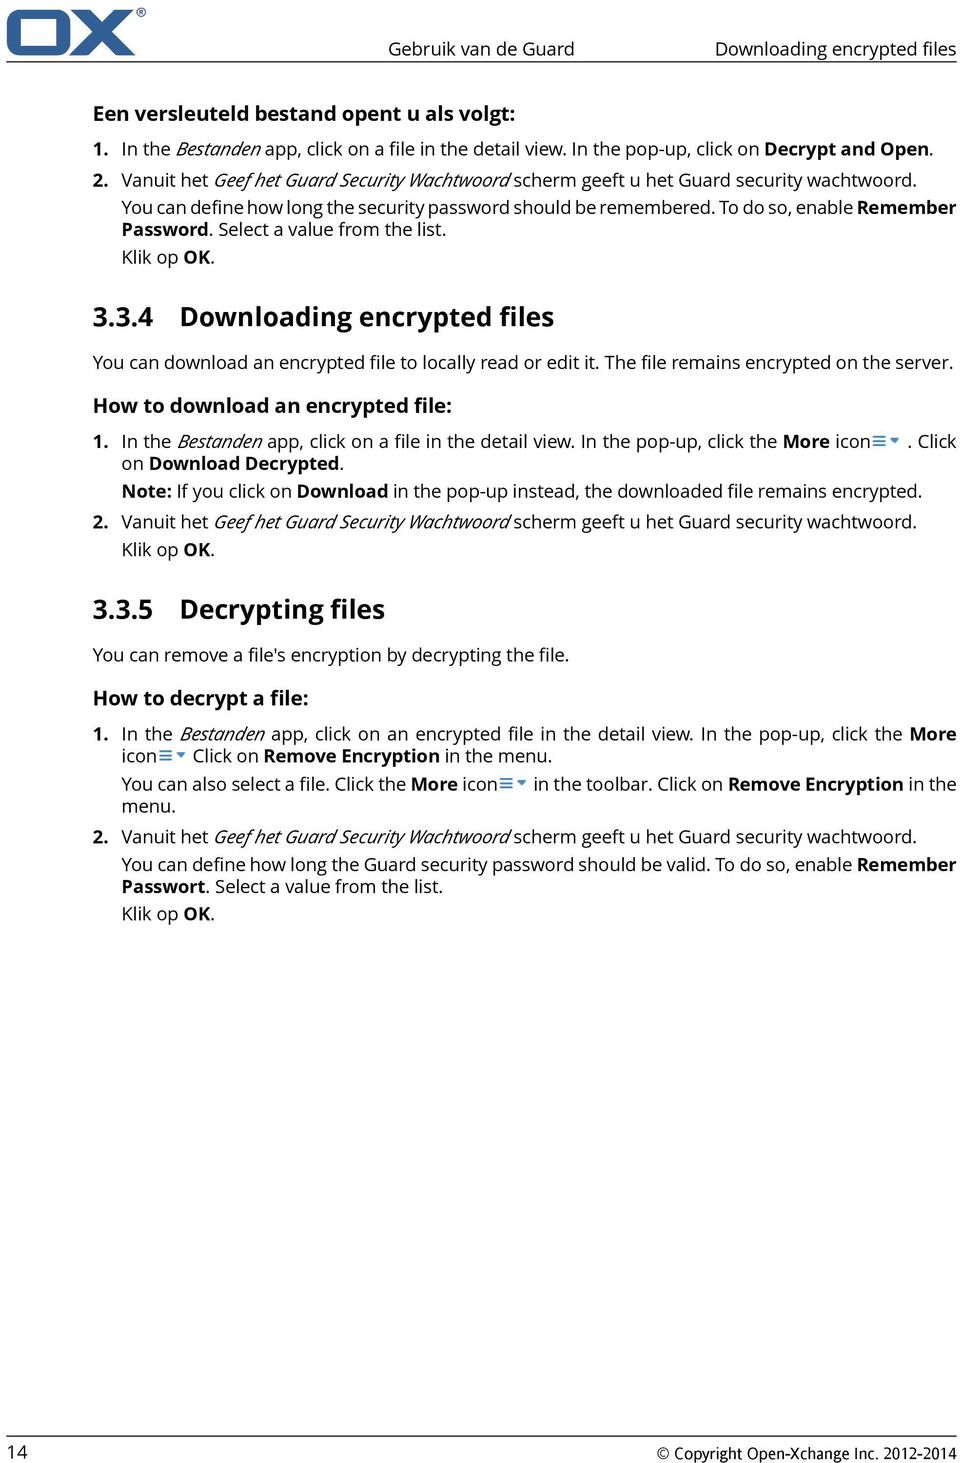 Select a value from the list. Klik op OK. 3.3.4 Downloading encrypted files You can download an encrypted file to locally read or edit it. The file remains encrypted on the server.